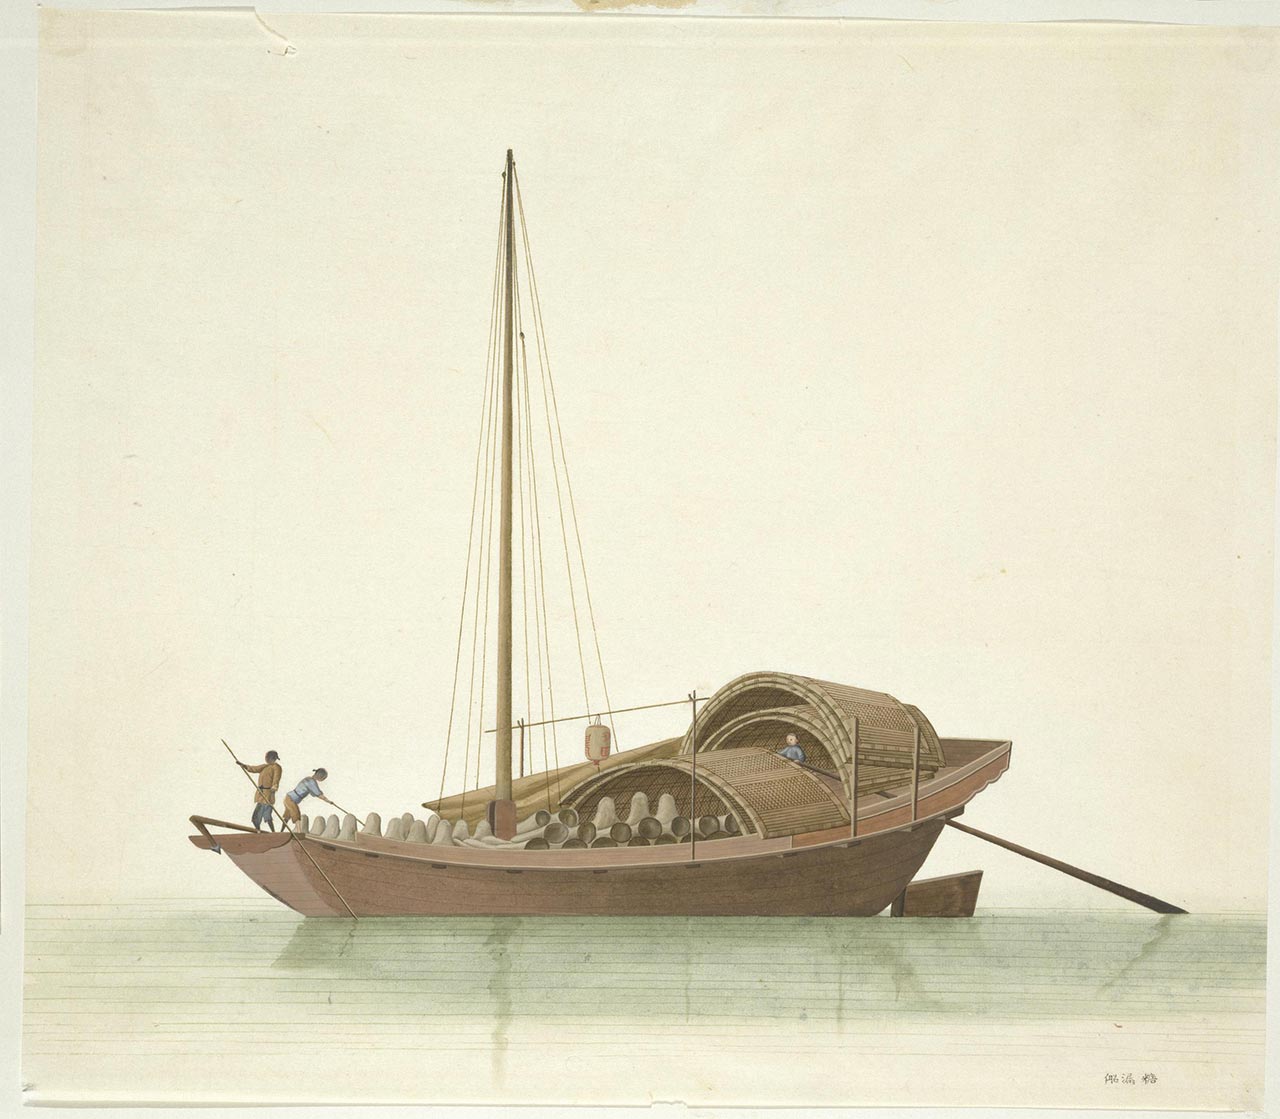 A boat that carried sugar funnels - cone-shaped vessels used in the production of sugar.